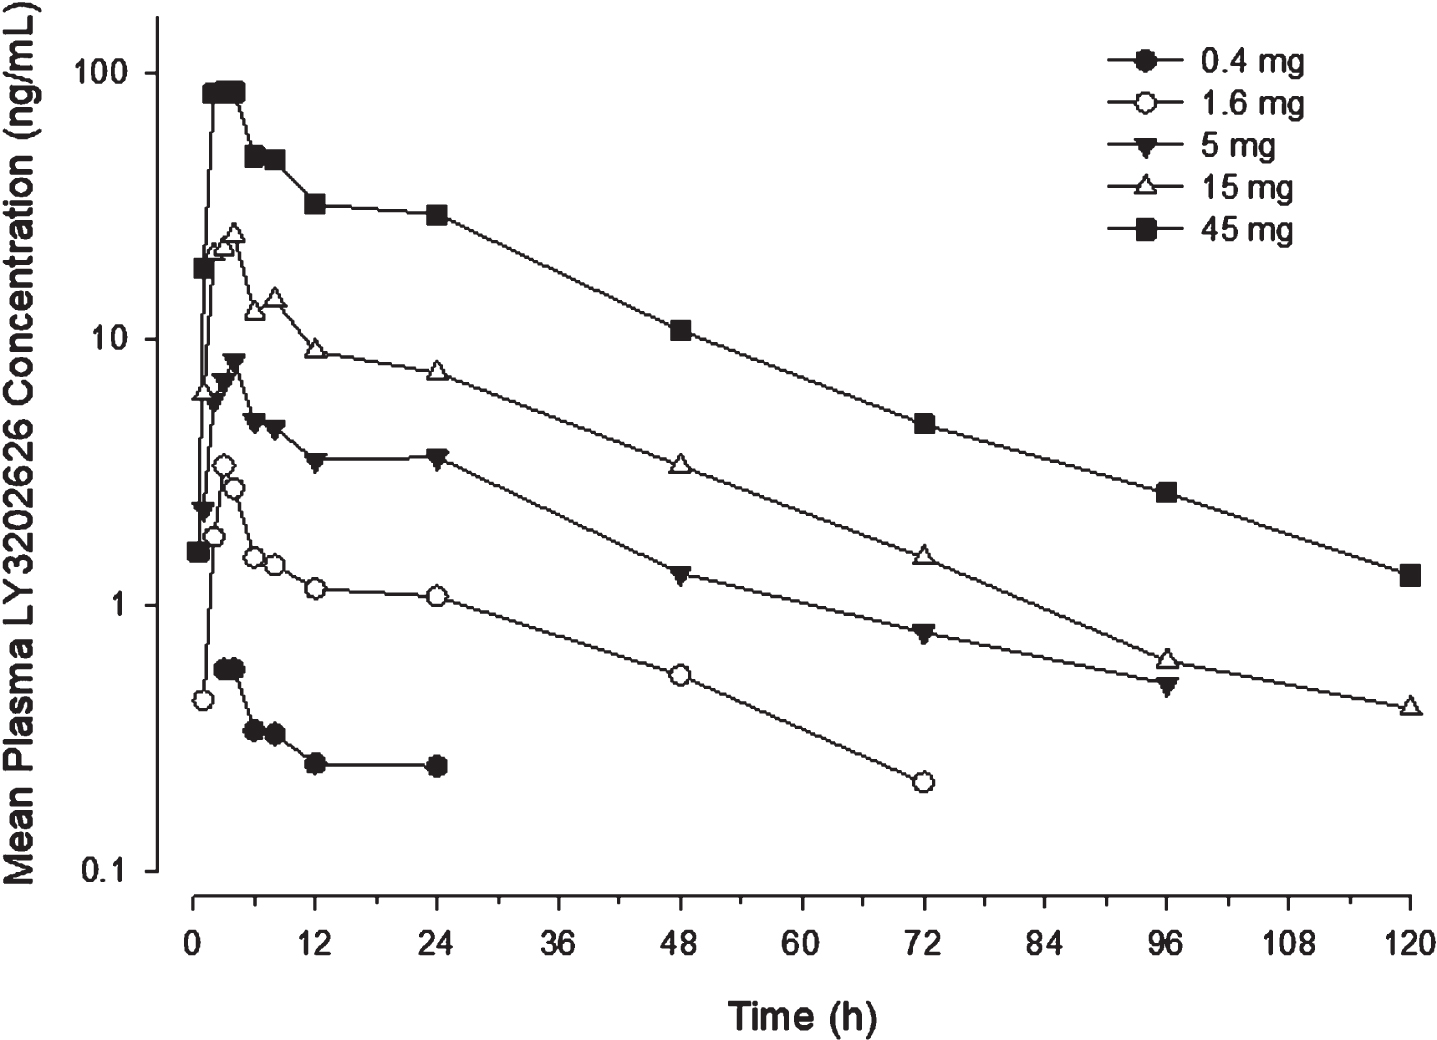 Plasma LY3202626 concentrations following single doses of 0.4 mg to 45 mg of LY3202626 in healthy subjects. Subjects received a single dose of 0.4, 1.6, 5, 15, or 45 mg LY3202626 (n = 8 per dose). Samples were drawn at times up to 120 h after dosing. The time of maximum concentration generally occurred 2.5 to 4 h after dosing. The shape of the concentration-time profile following absorption was generally bi-exponential, with a secondary peak occurring in 2–5 patients per dose group at approximately 24 h after dosing.